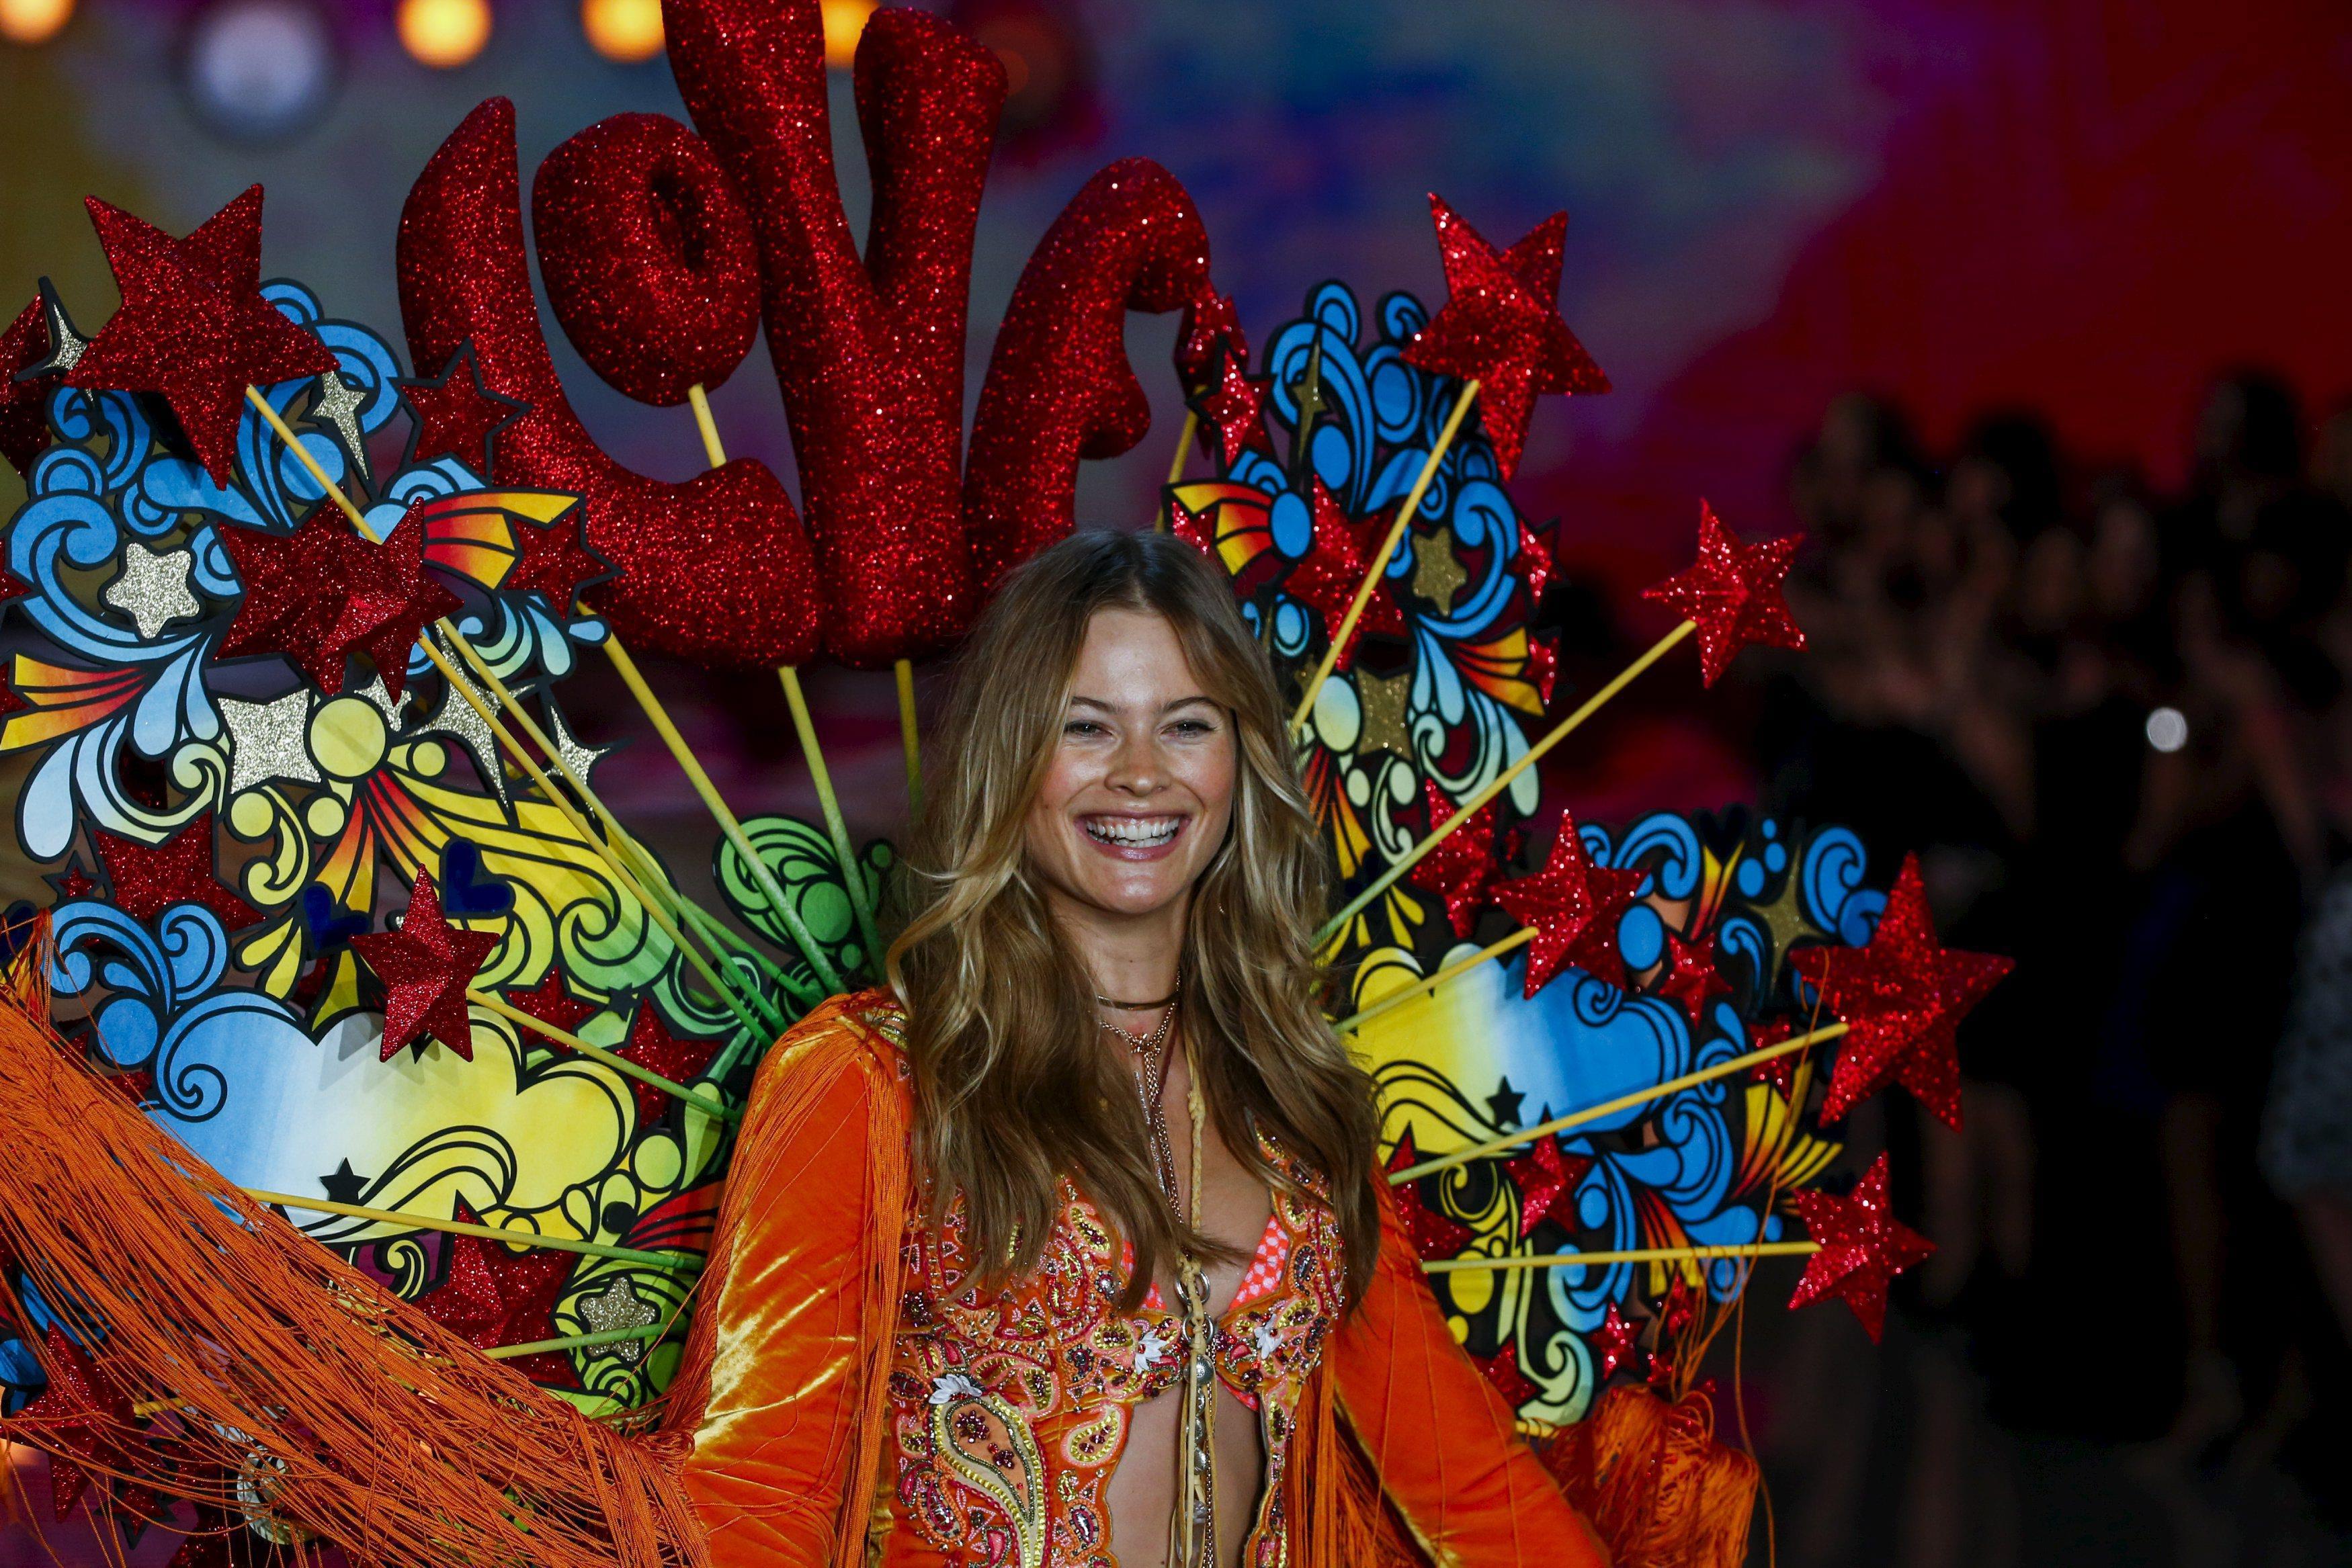 Model Behati Prinsloo presents a creation during the 2015 Victoria's Secret Fashion Show in New York